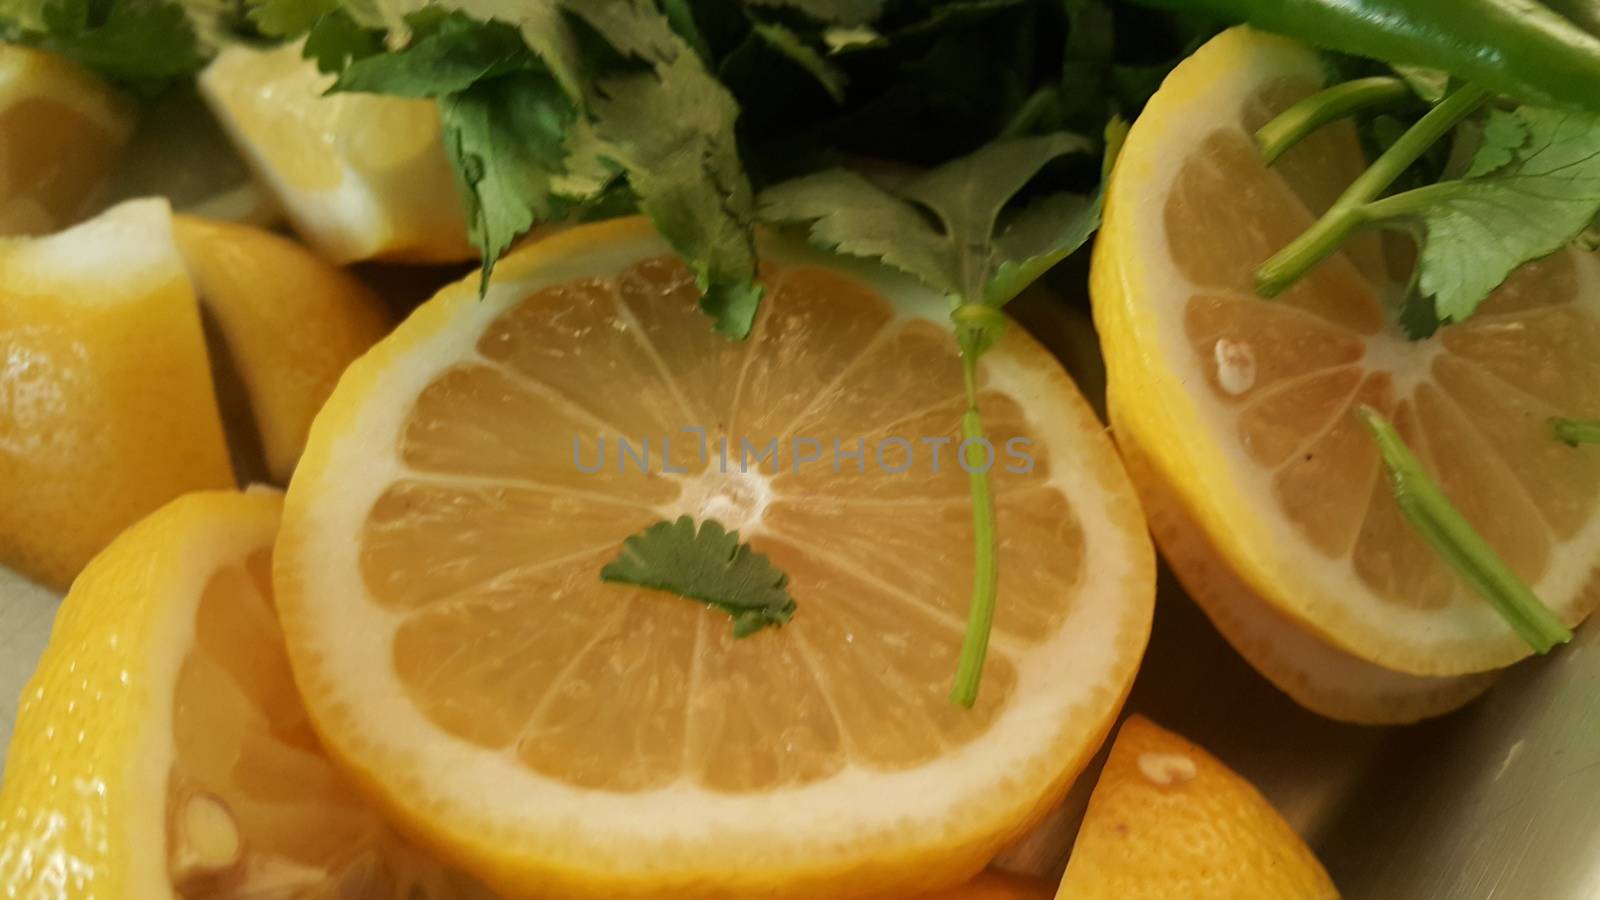 Top view of fresh lemon slices with green pepper cut into pieces for salad.  by Photochowk